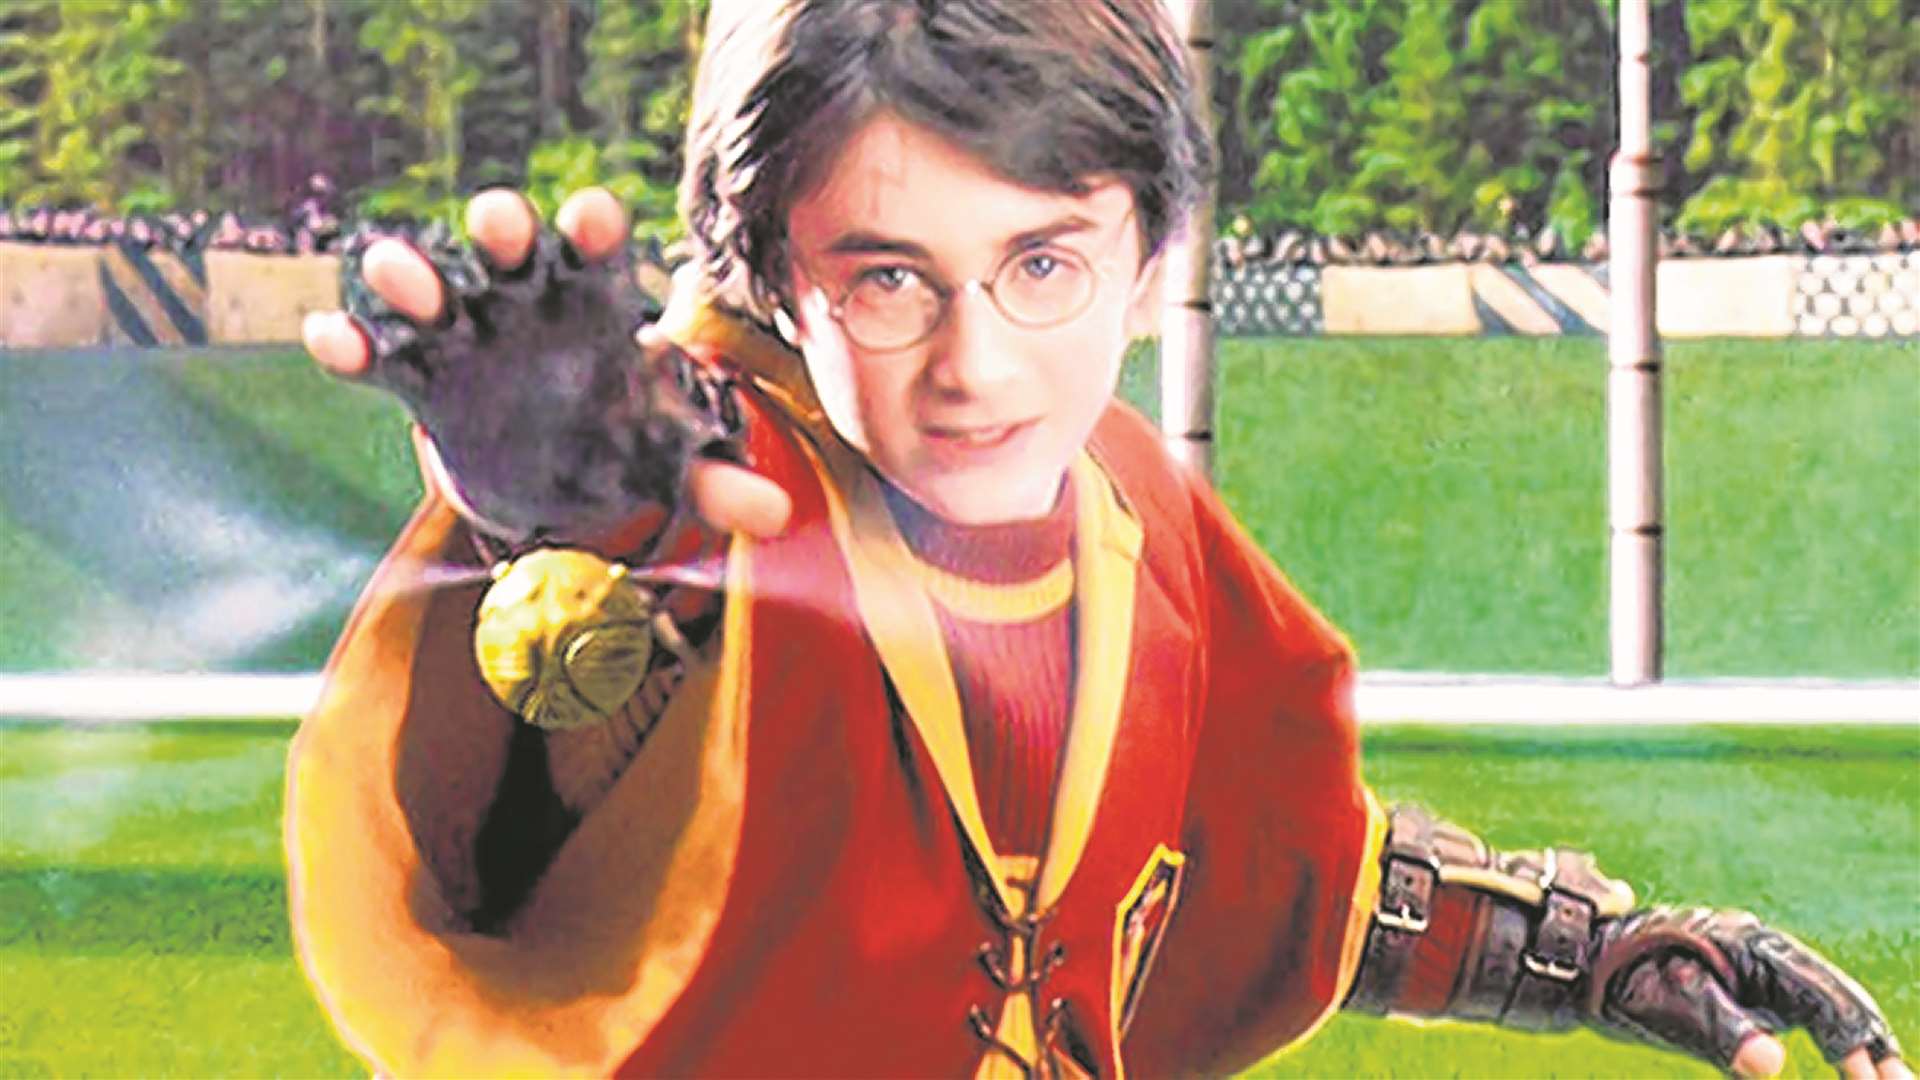 Harry Potter, played by Daniel Radcliffe, played quidditch in the films of JK Rowling's books. Picture Warner Brothers Pictures